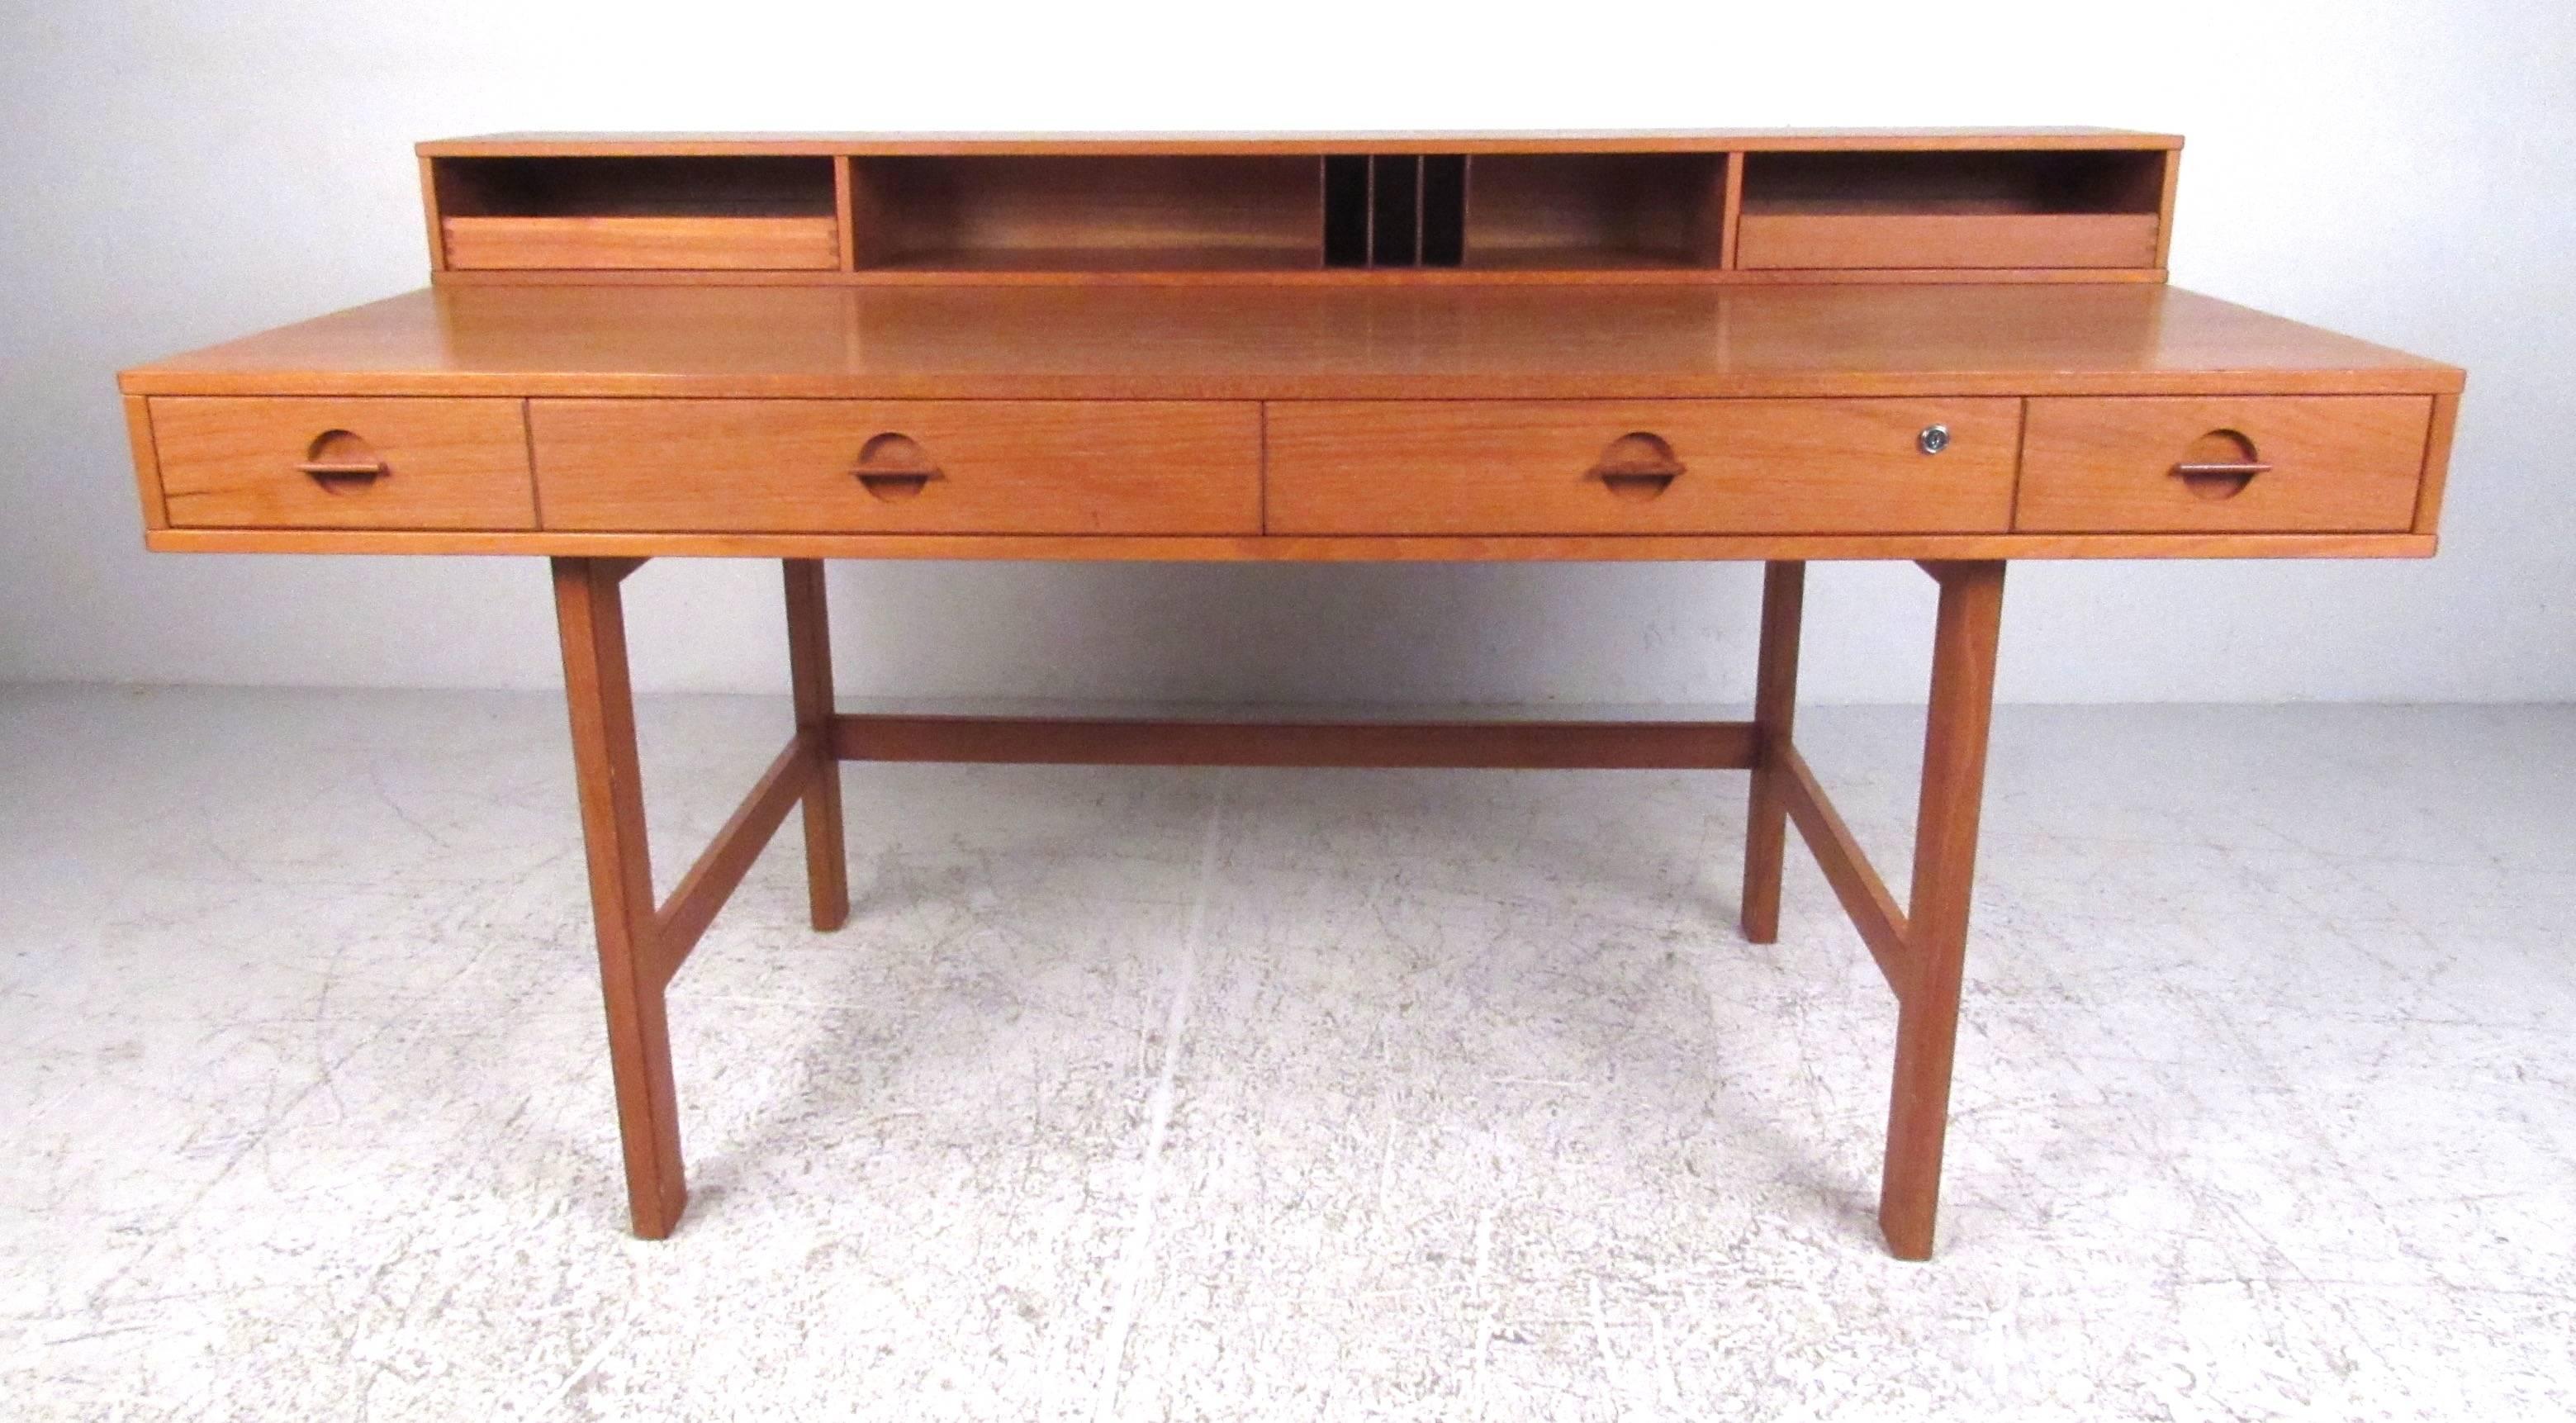 An expandable Danish modern desk designed by Jens Quistgaard of Dansk for Peter Løvig Nielsen, circa 1970s. With a generous work surface and low profile cubbies and storage trays, it can easily convert to a partners desk or conference table, while